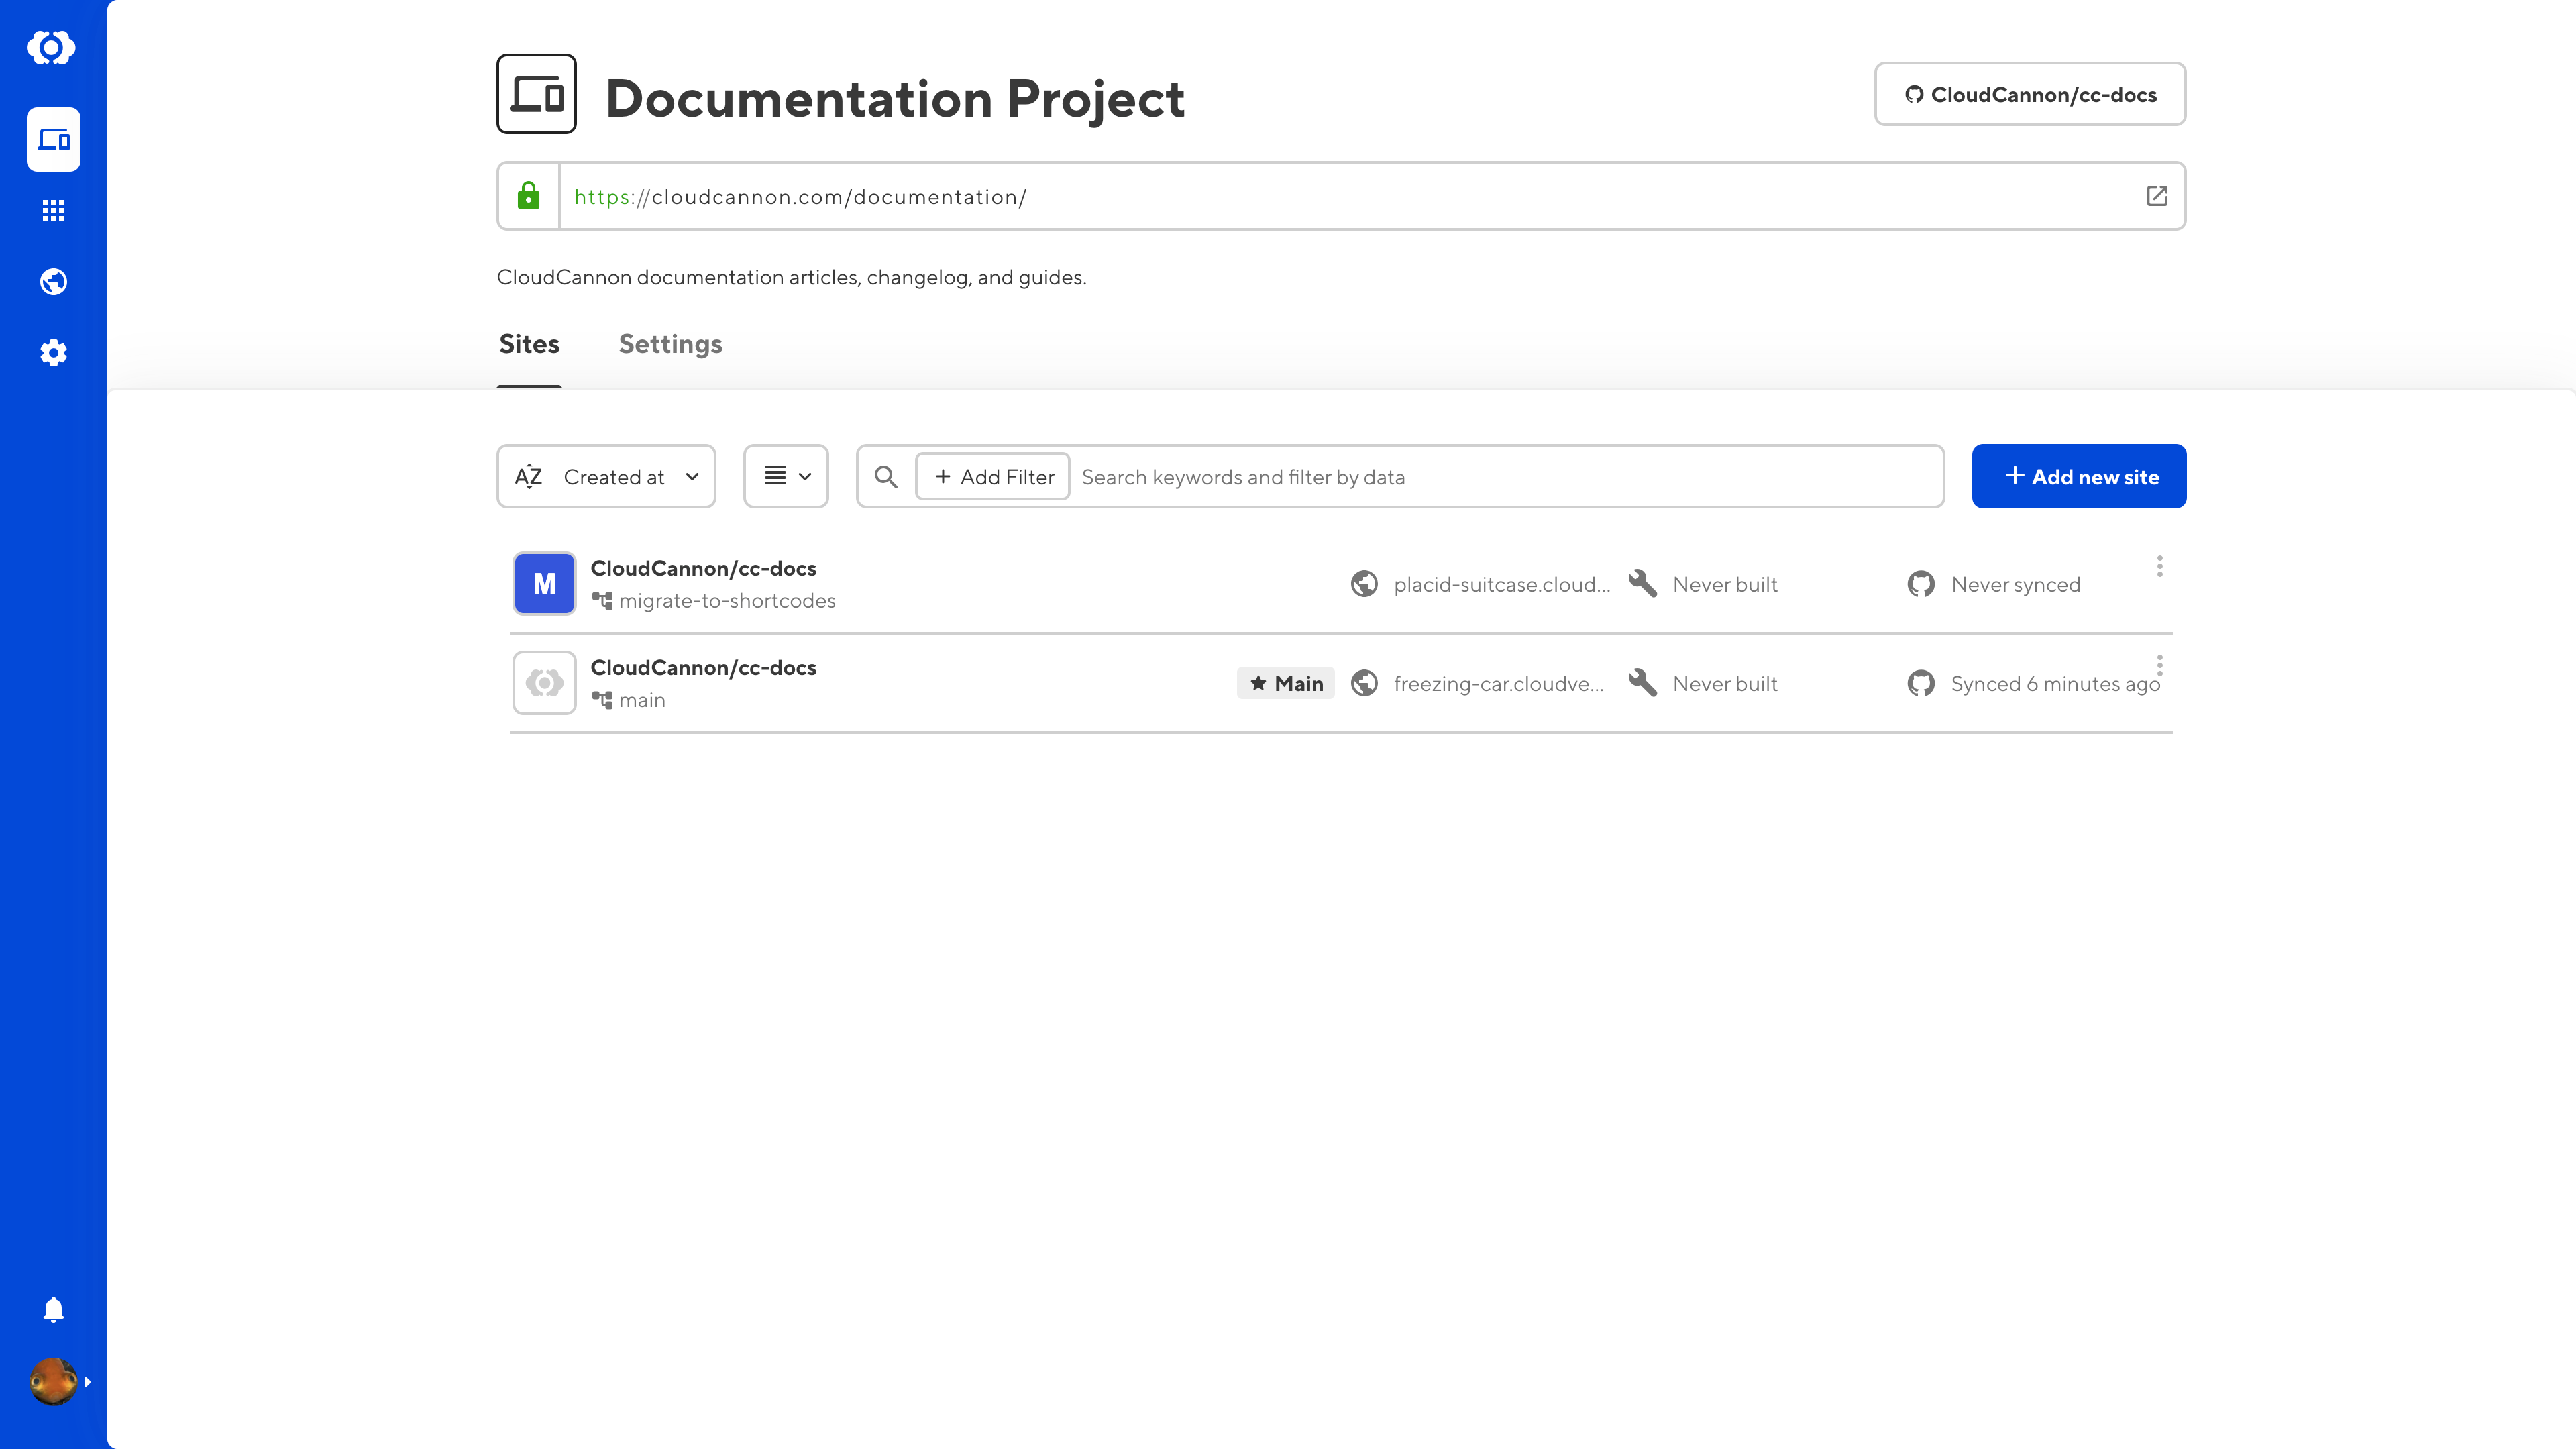 A screenshot of the CloudCannon app shows the Documentation Project page with a list of branch sites under the Sites tab.